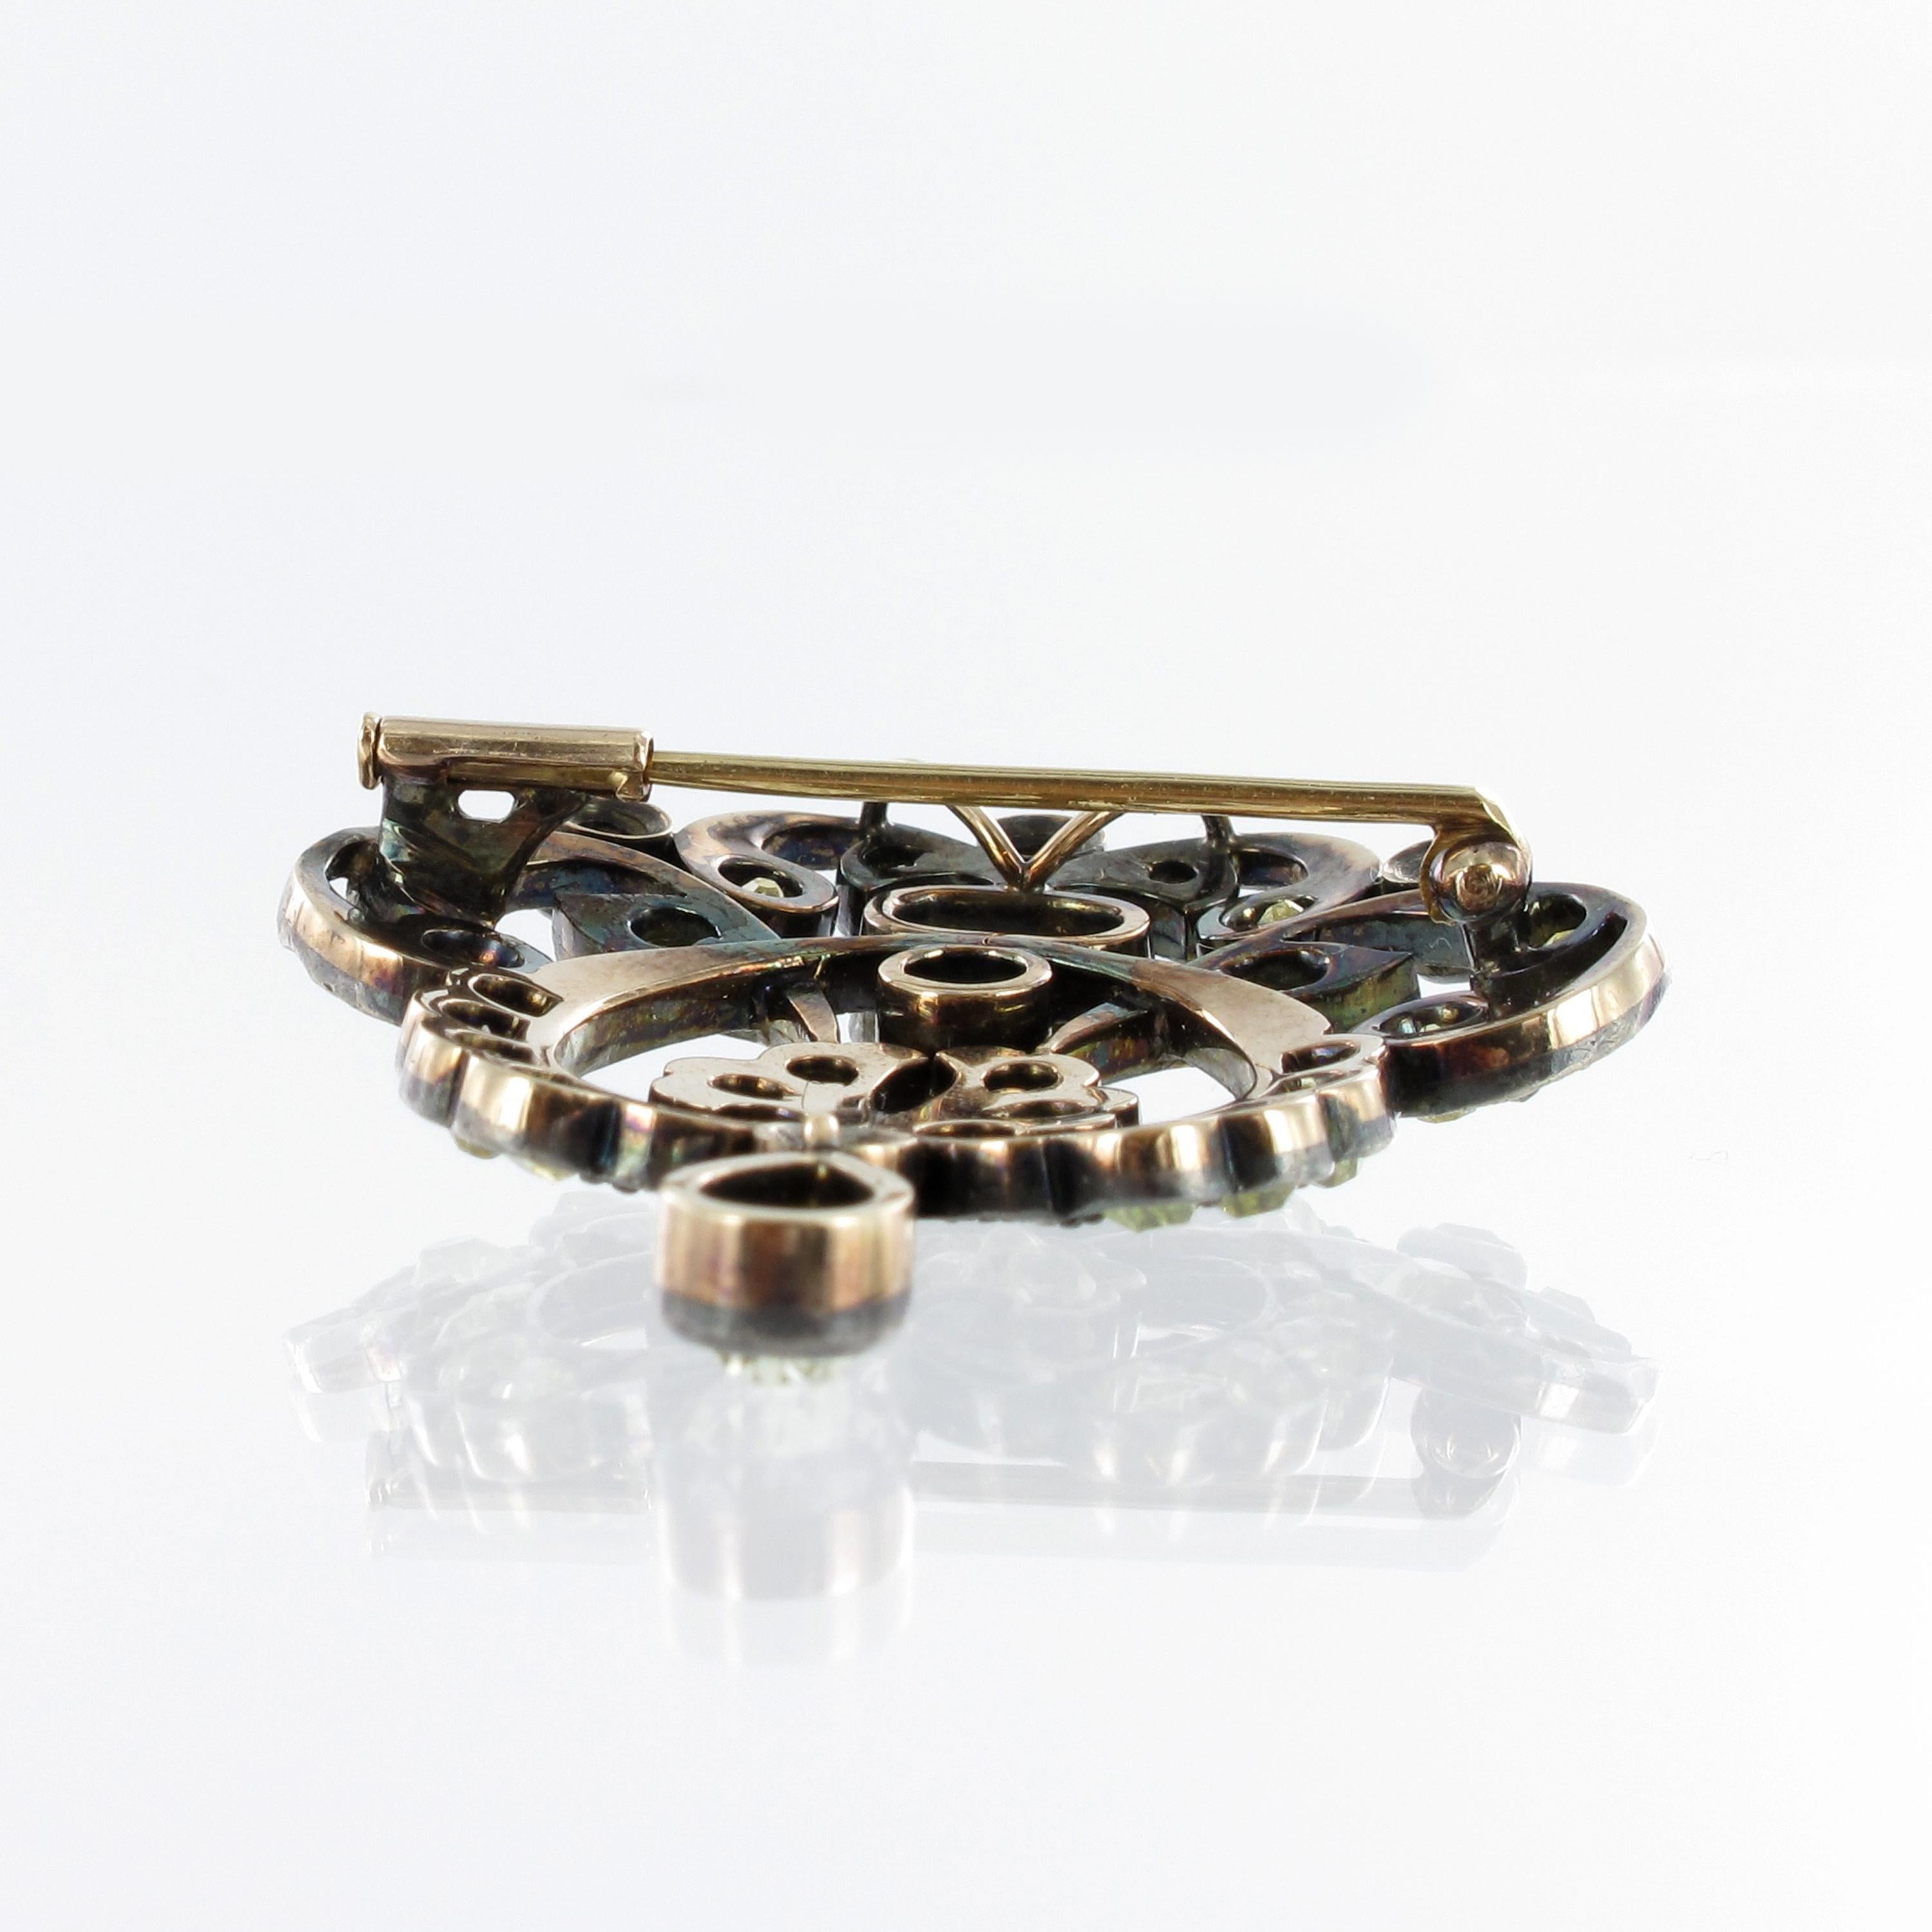 Women's or Men's Victorian Pendant/Brooch with Old-Cut Diamonds in Silver and Gold